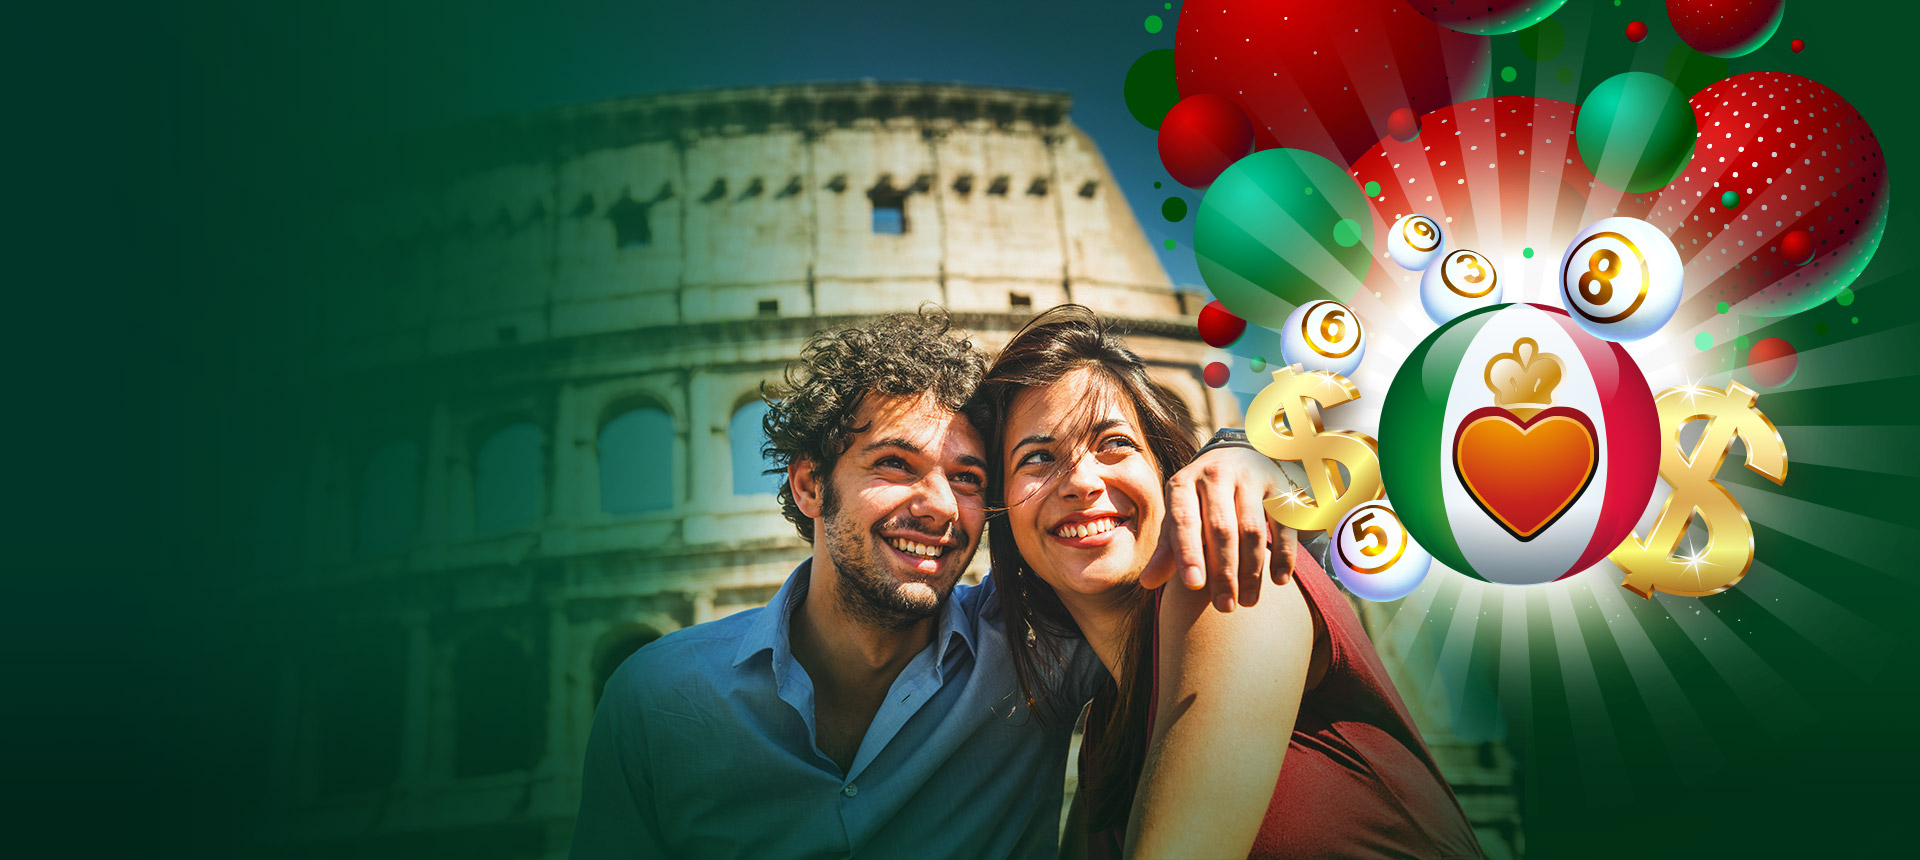 We bring you Italy's best lottery! €250 MILLION JACKPOT! Play SuperEnalotto now!